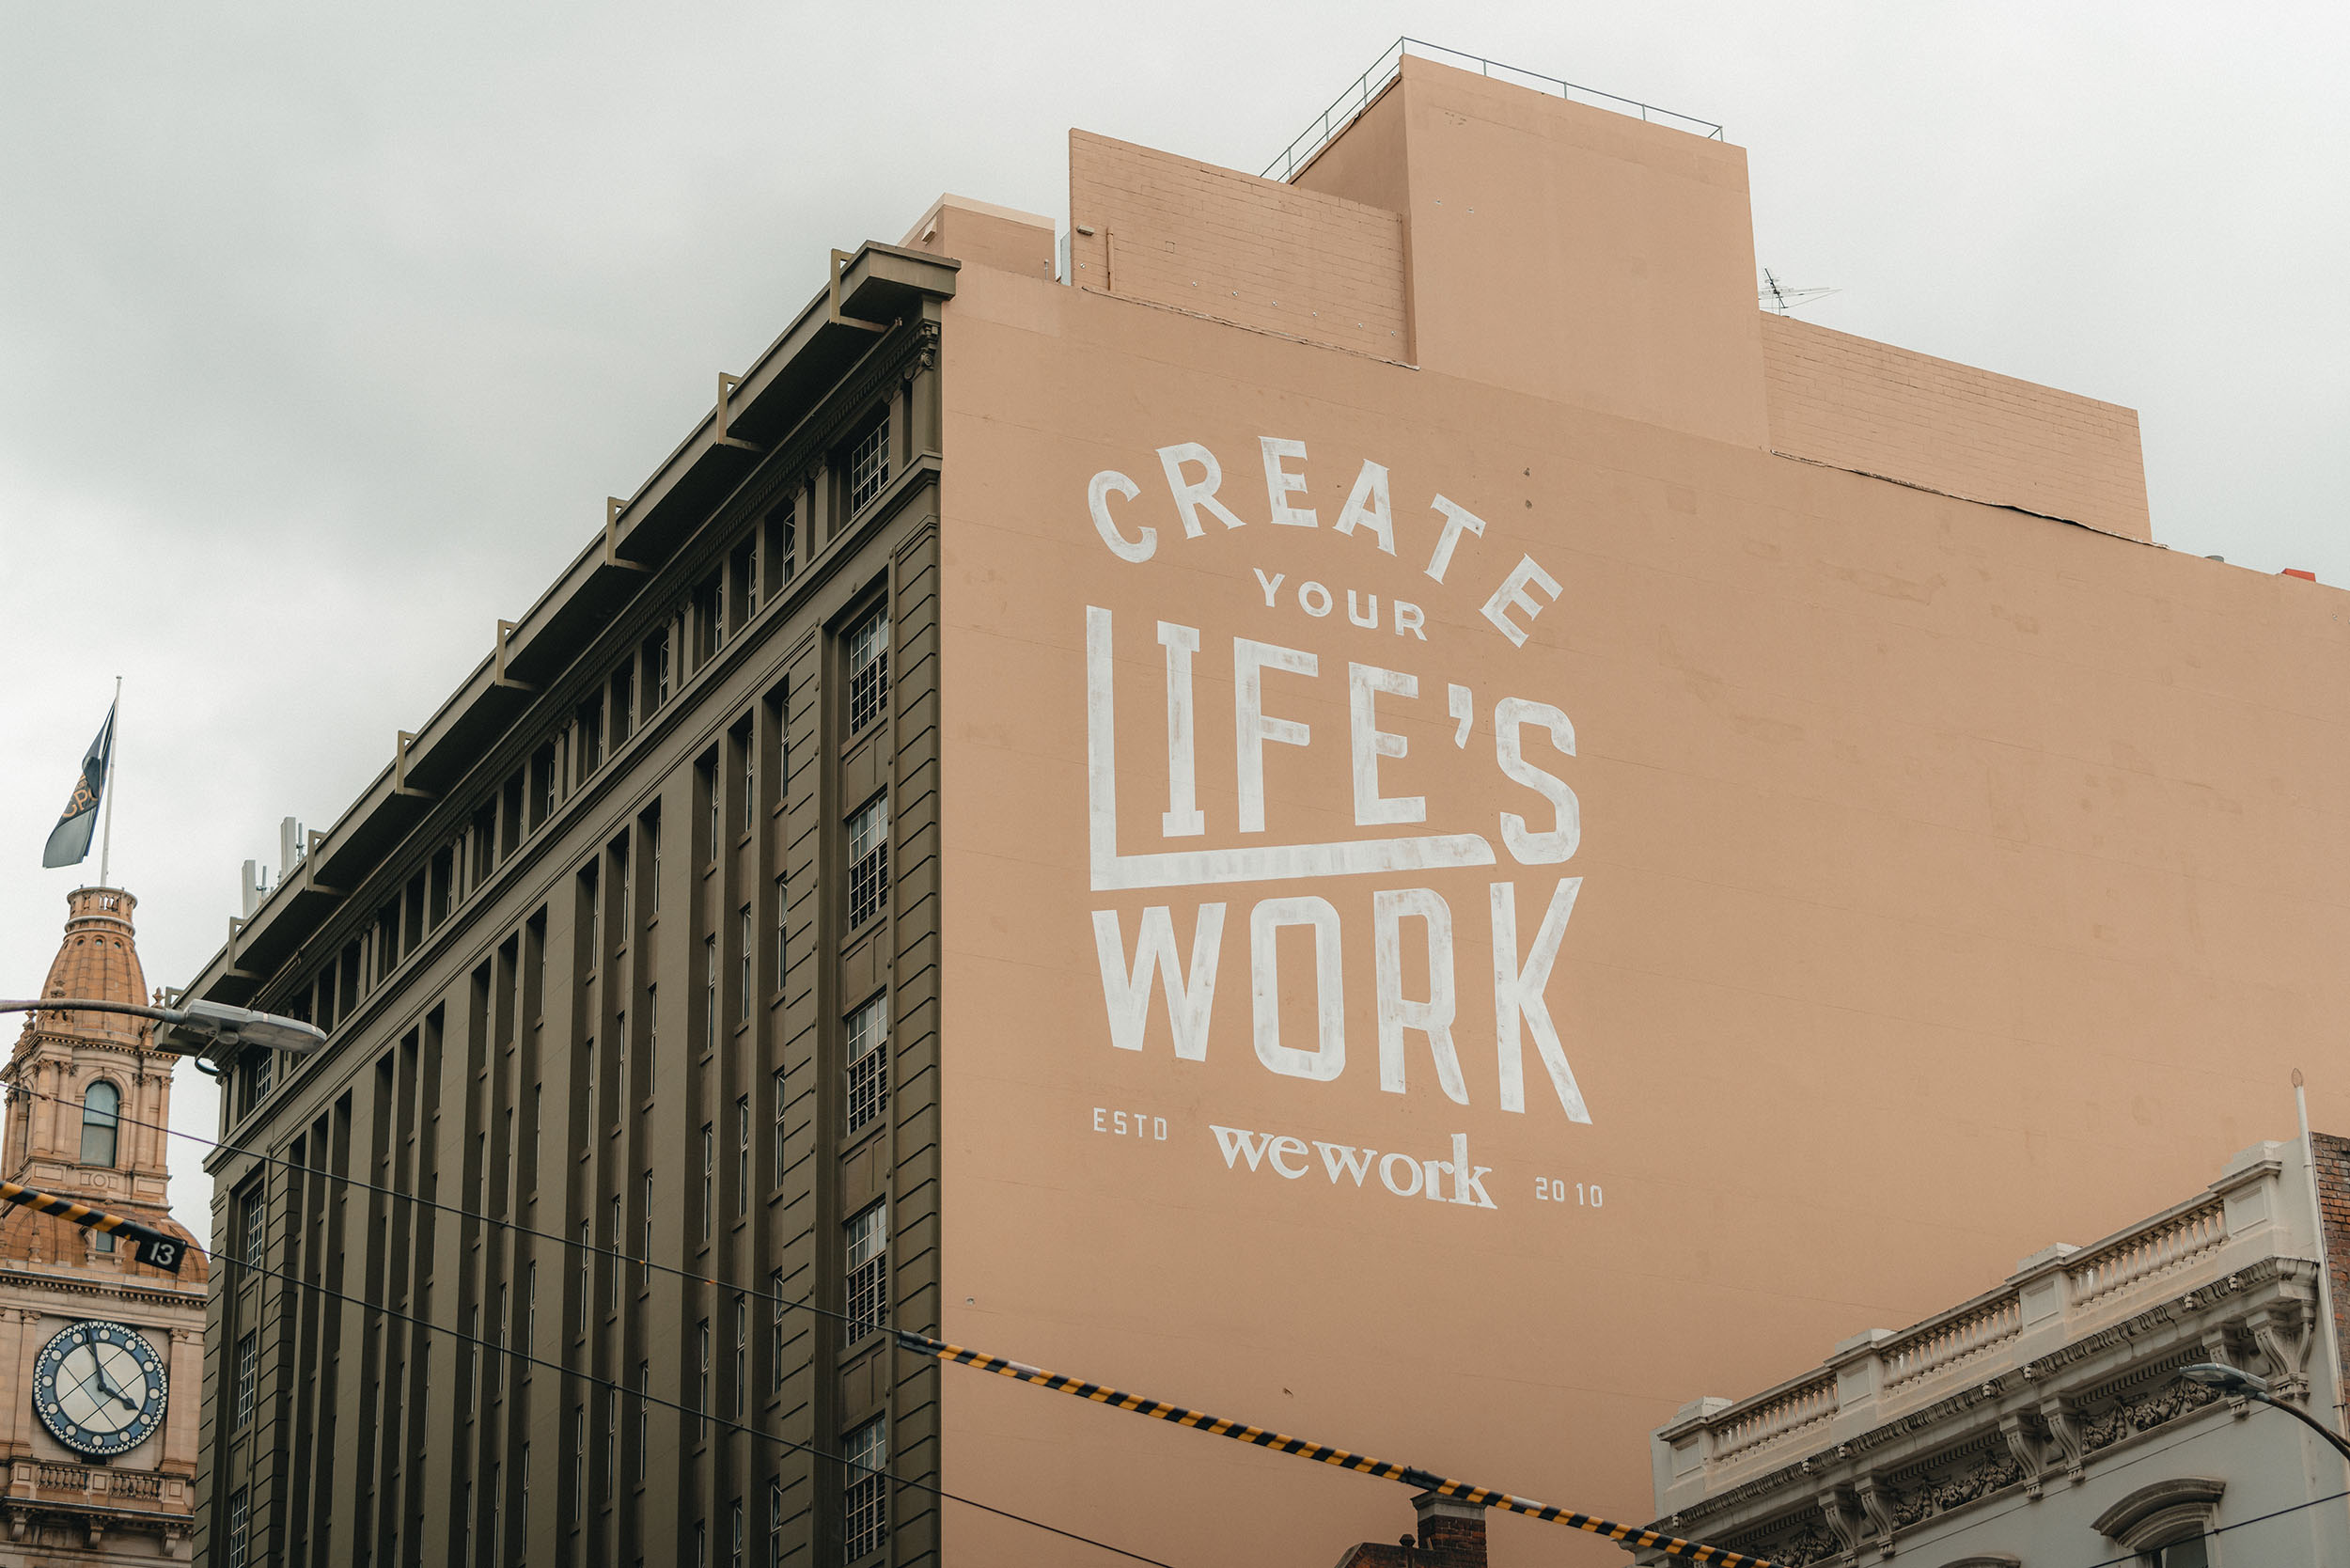 Create your life's work written on the side of the building